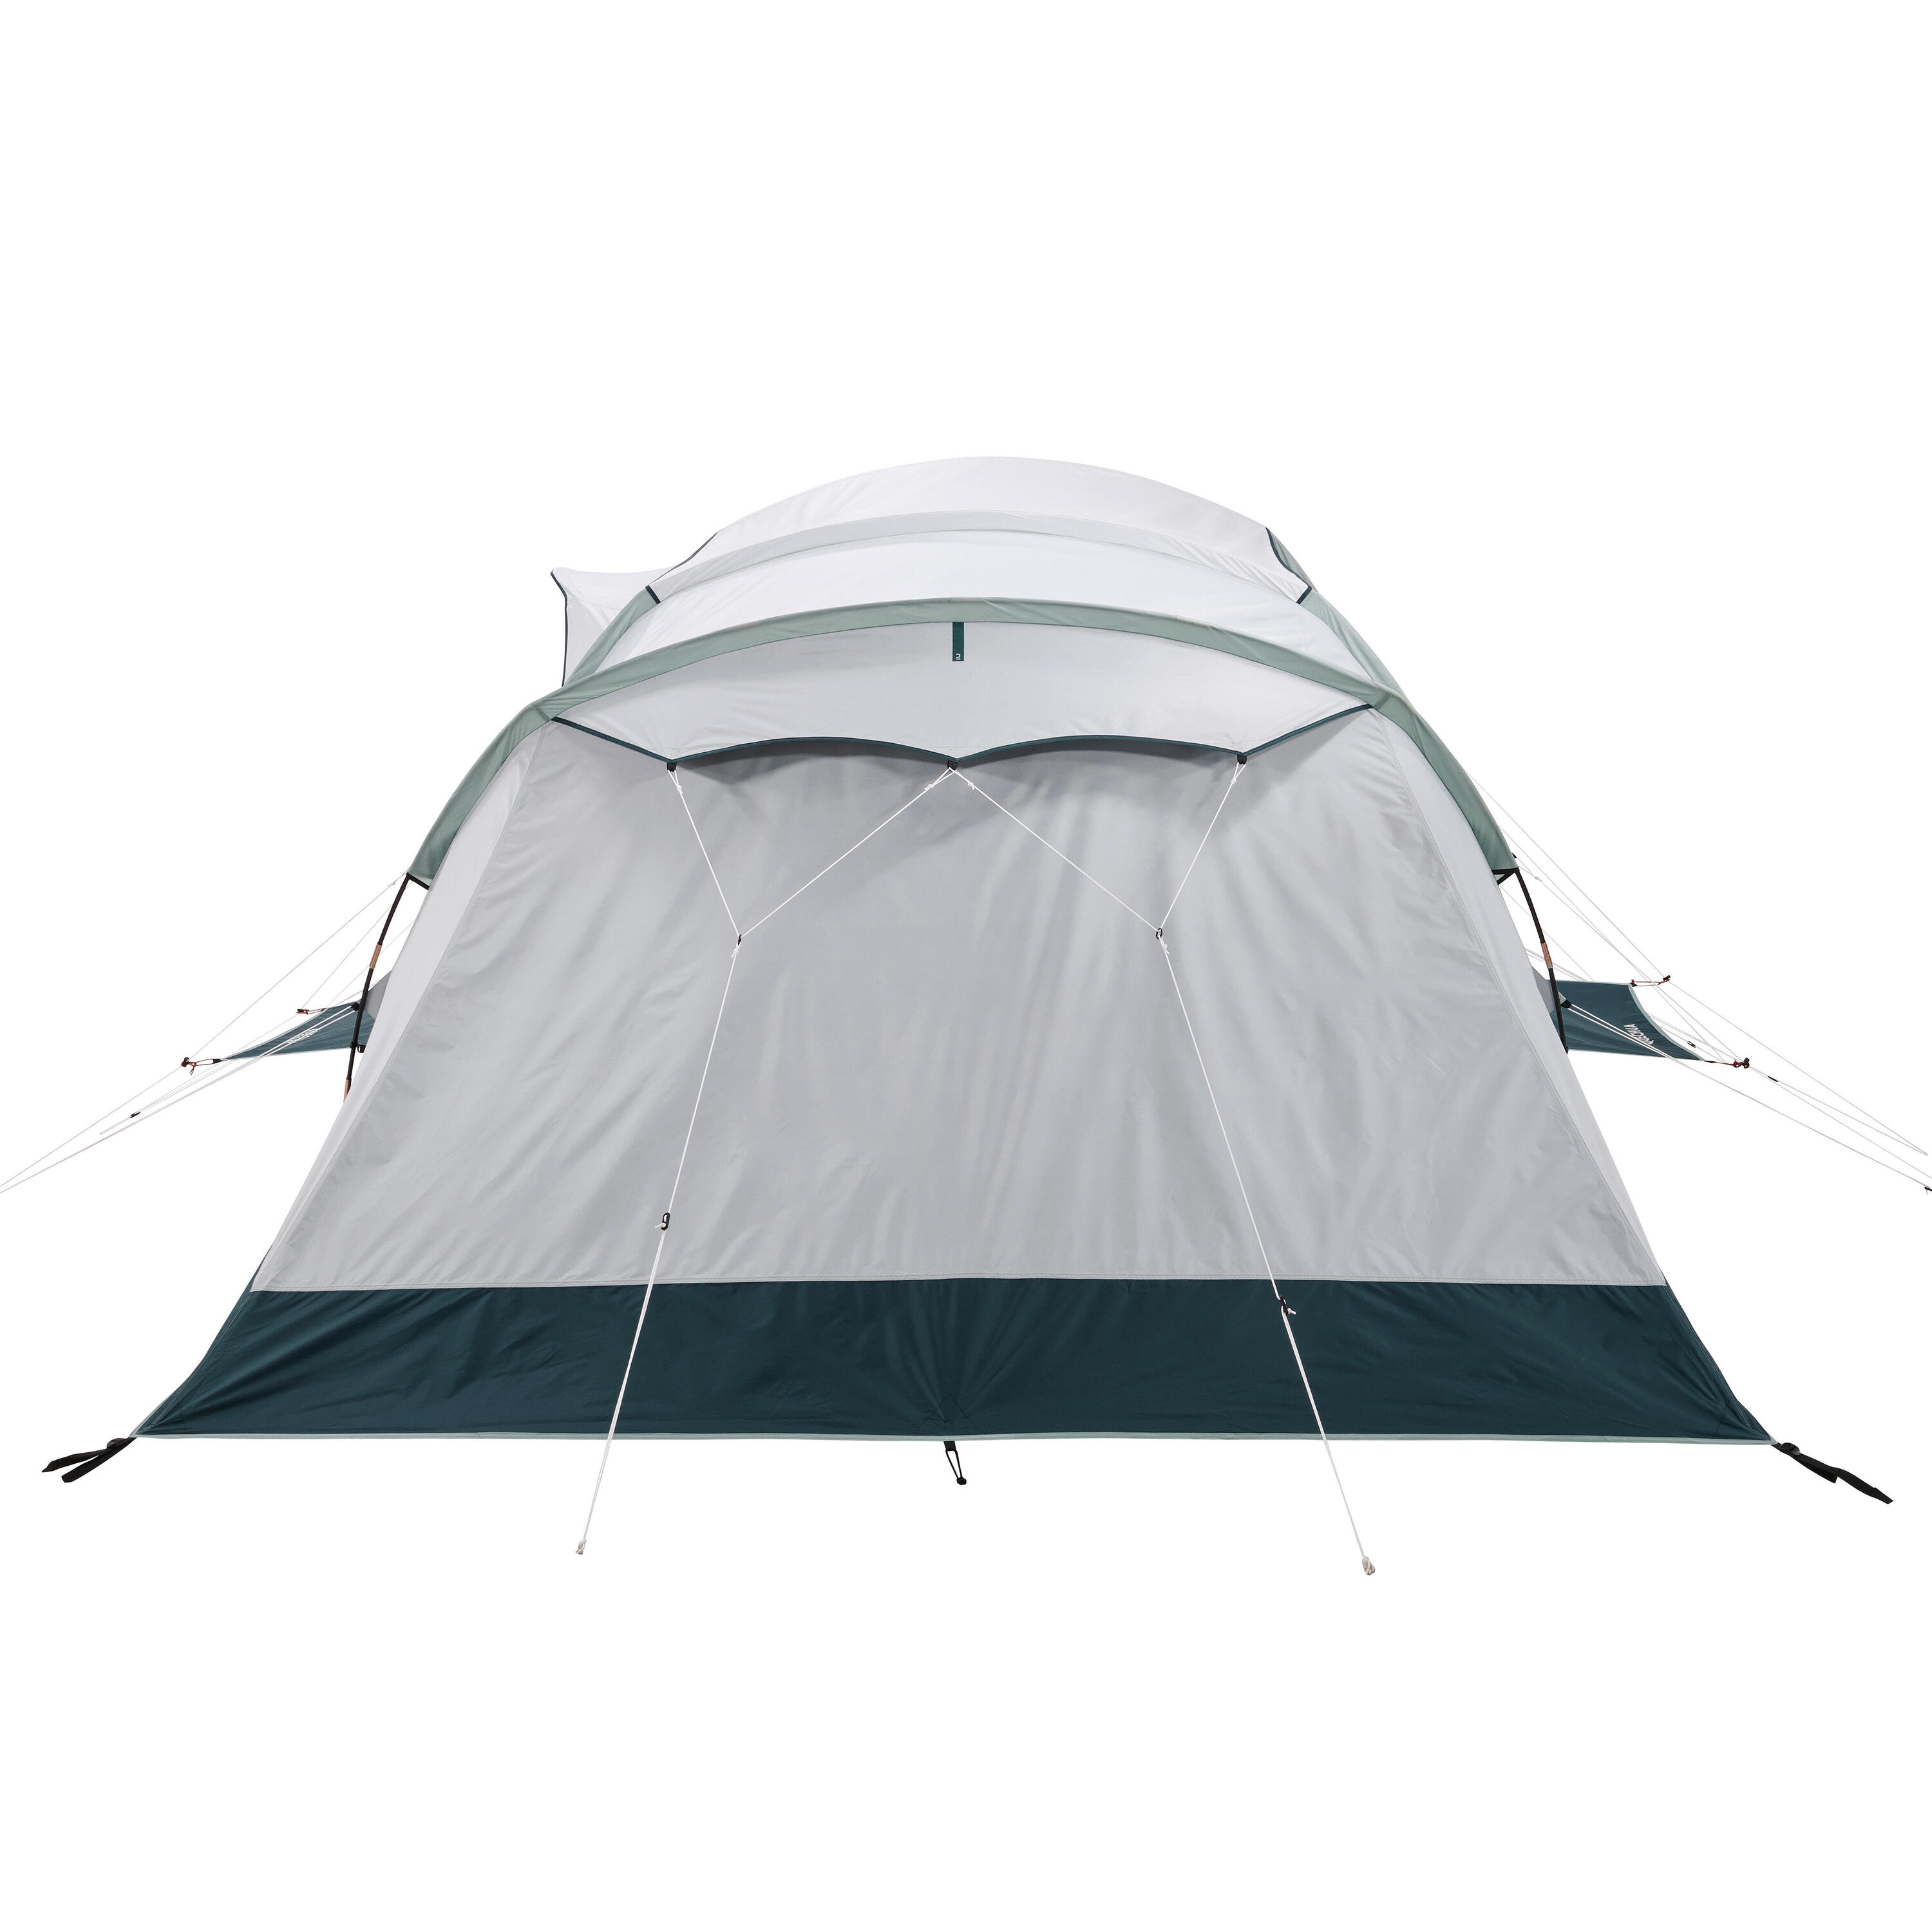 Camping tent with poles - Arpenaz 6.3 F&B - 6 Person - 3 Bedrooms 12/35